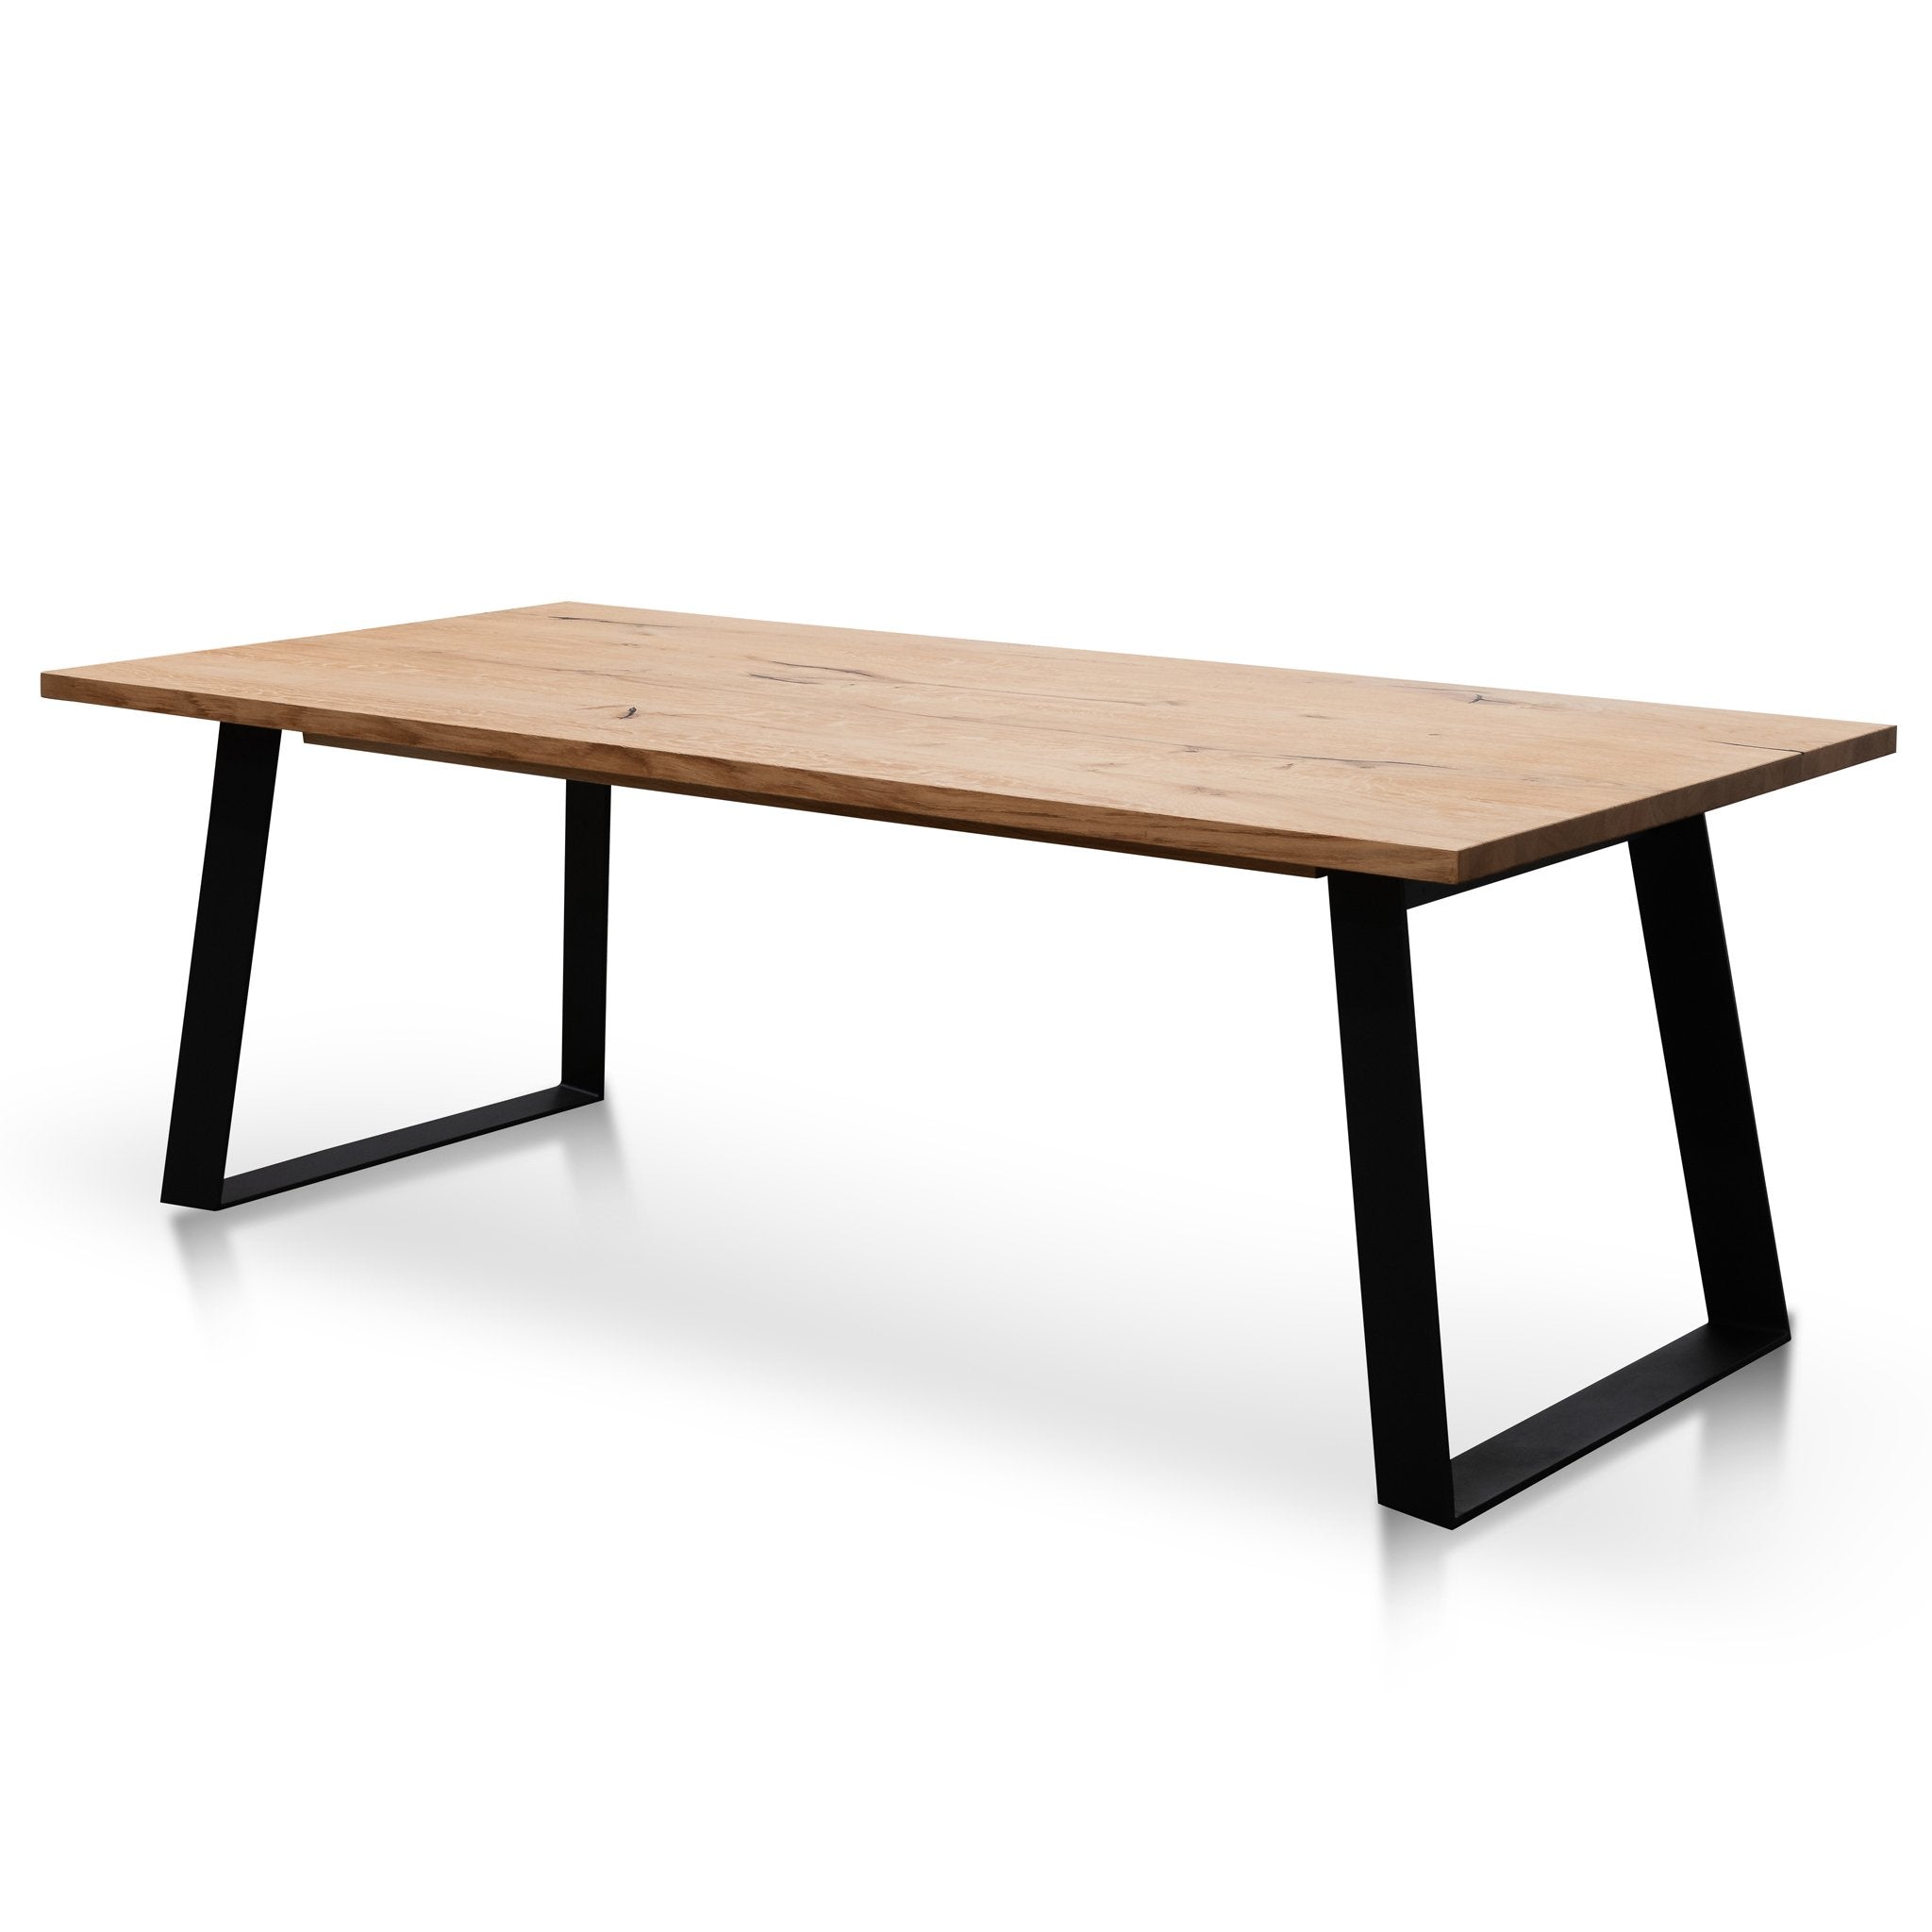 Nile 2.2m Straight Top Dining table - Rustic Oak - Metal Legs - Dining Tables